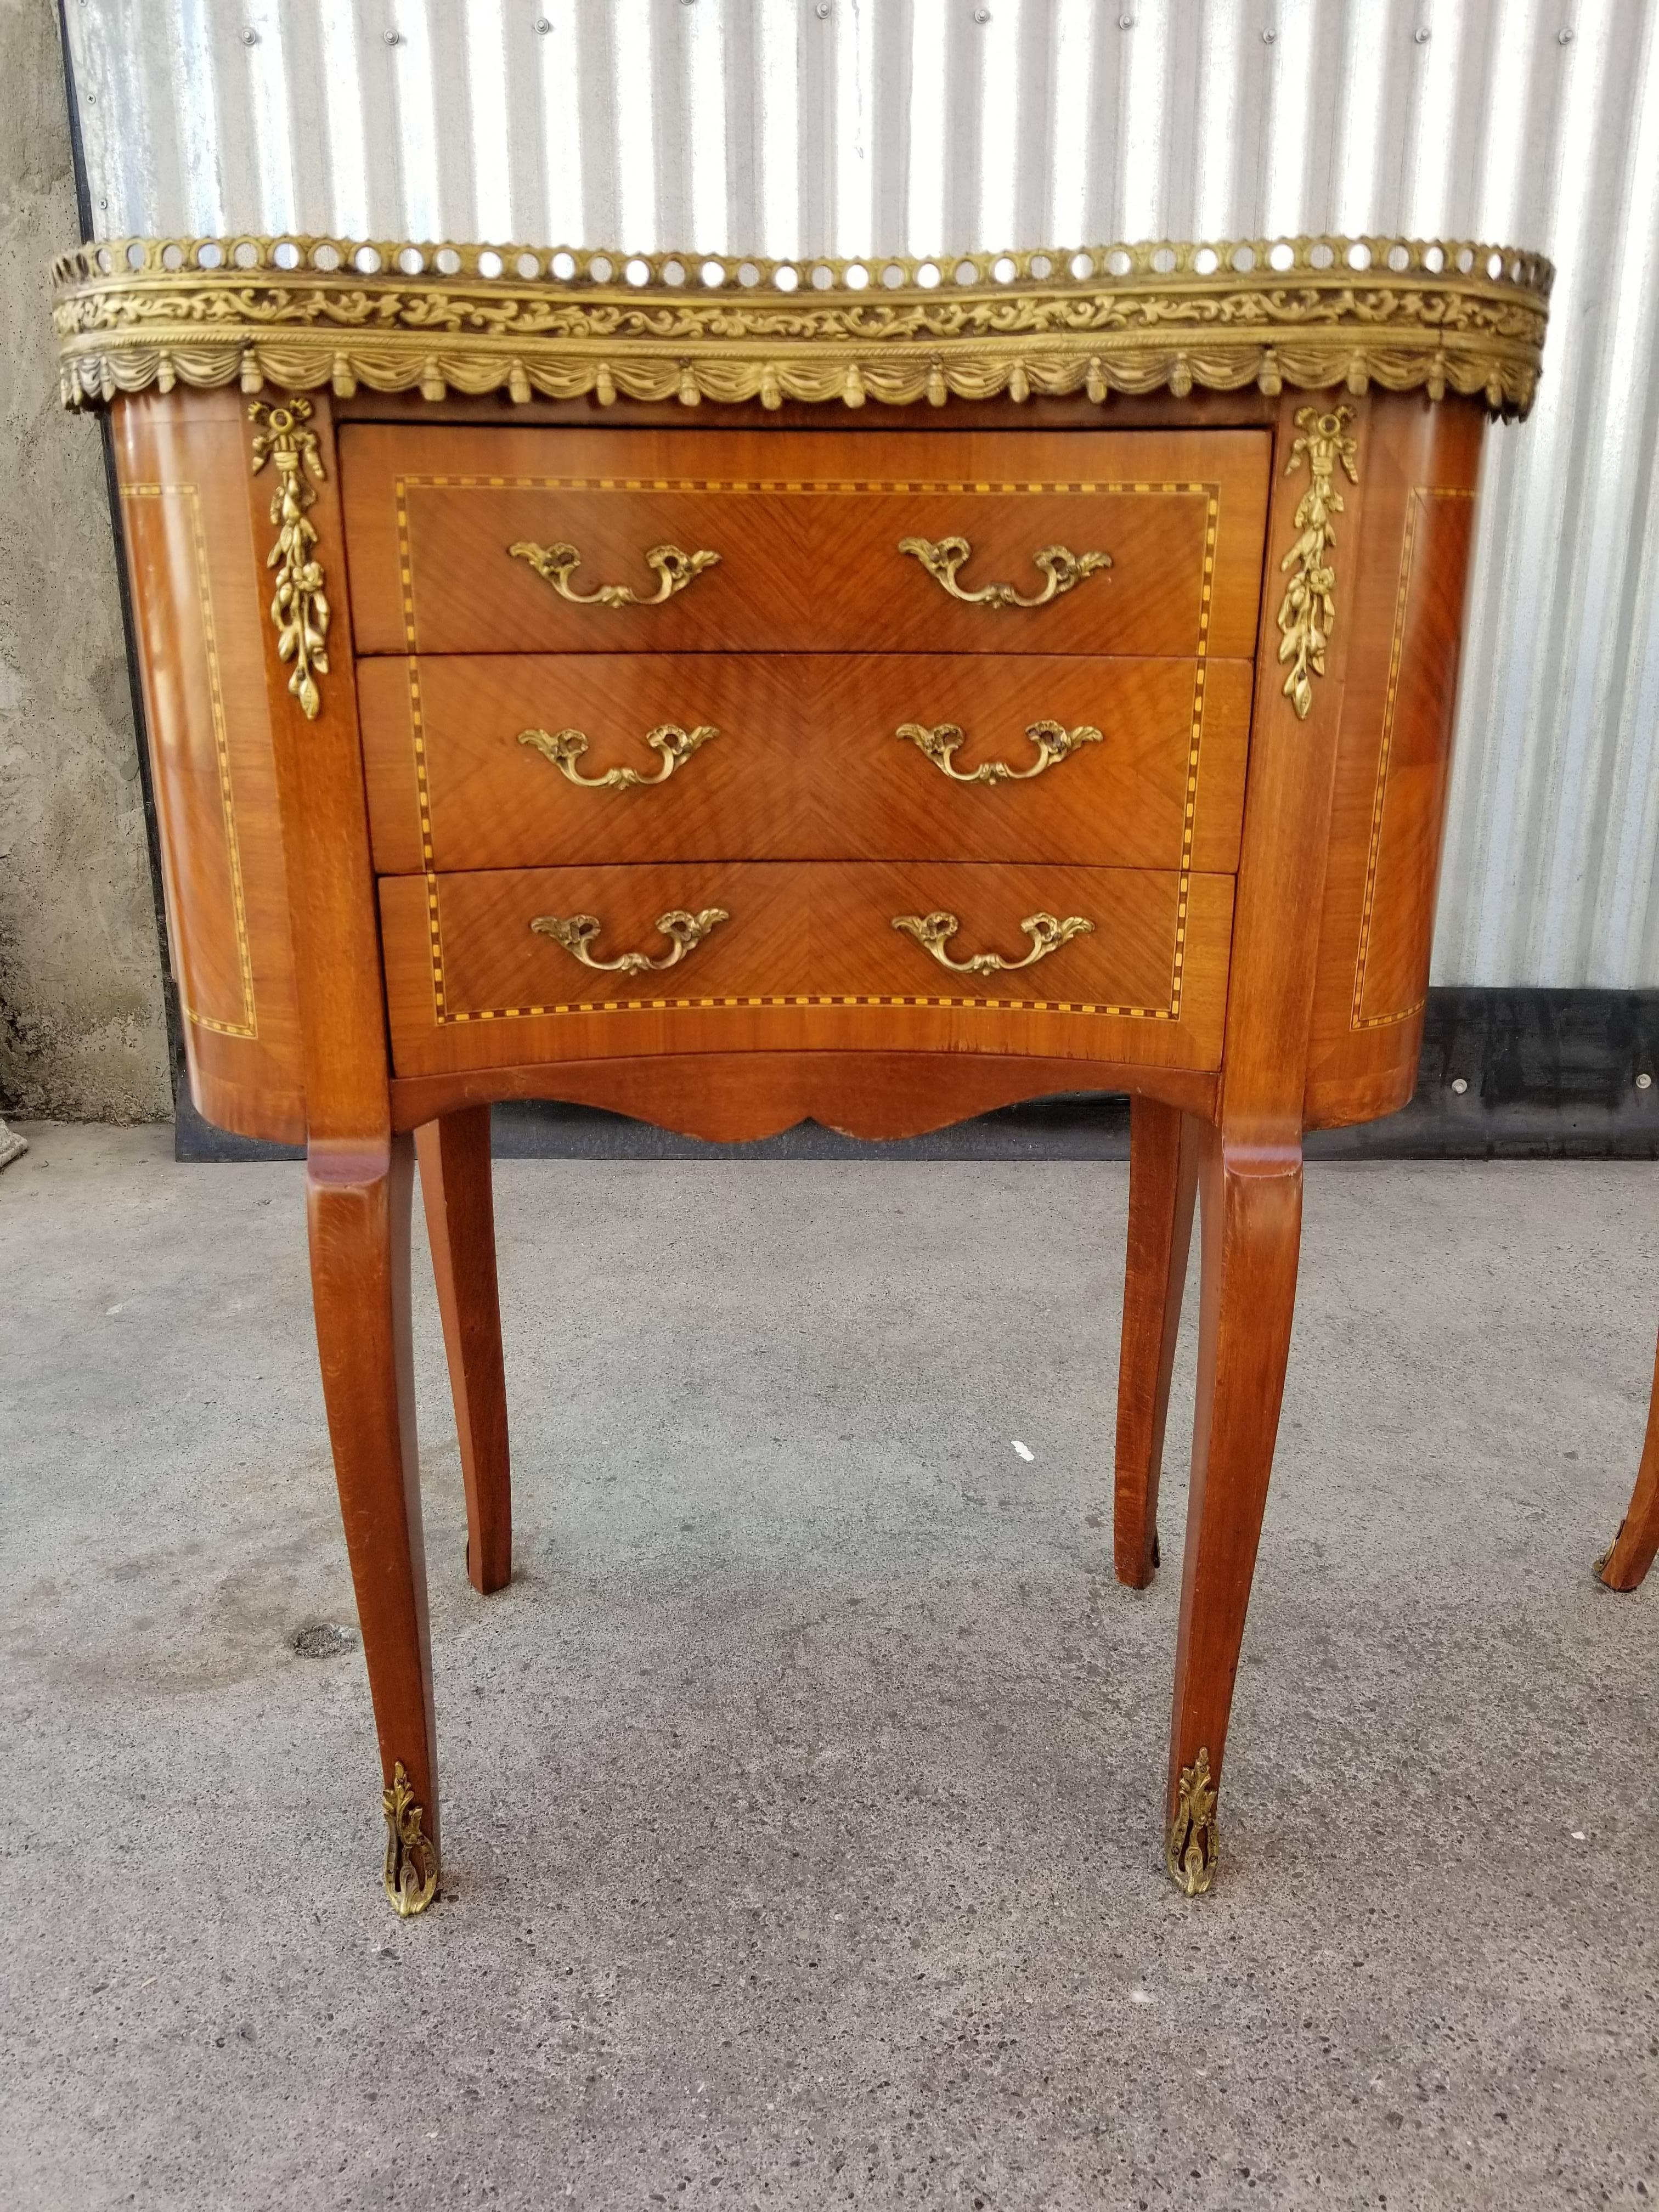 Two Louis XV style end tables with gilt ormolu, marquetry and marble tops. Excellent original condition. Made in Italy, late 20th century. Single drawer table measures 20.25